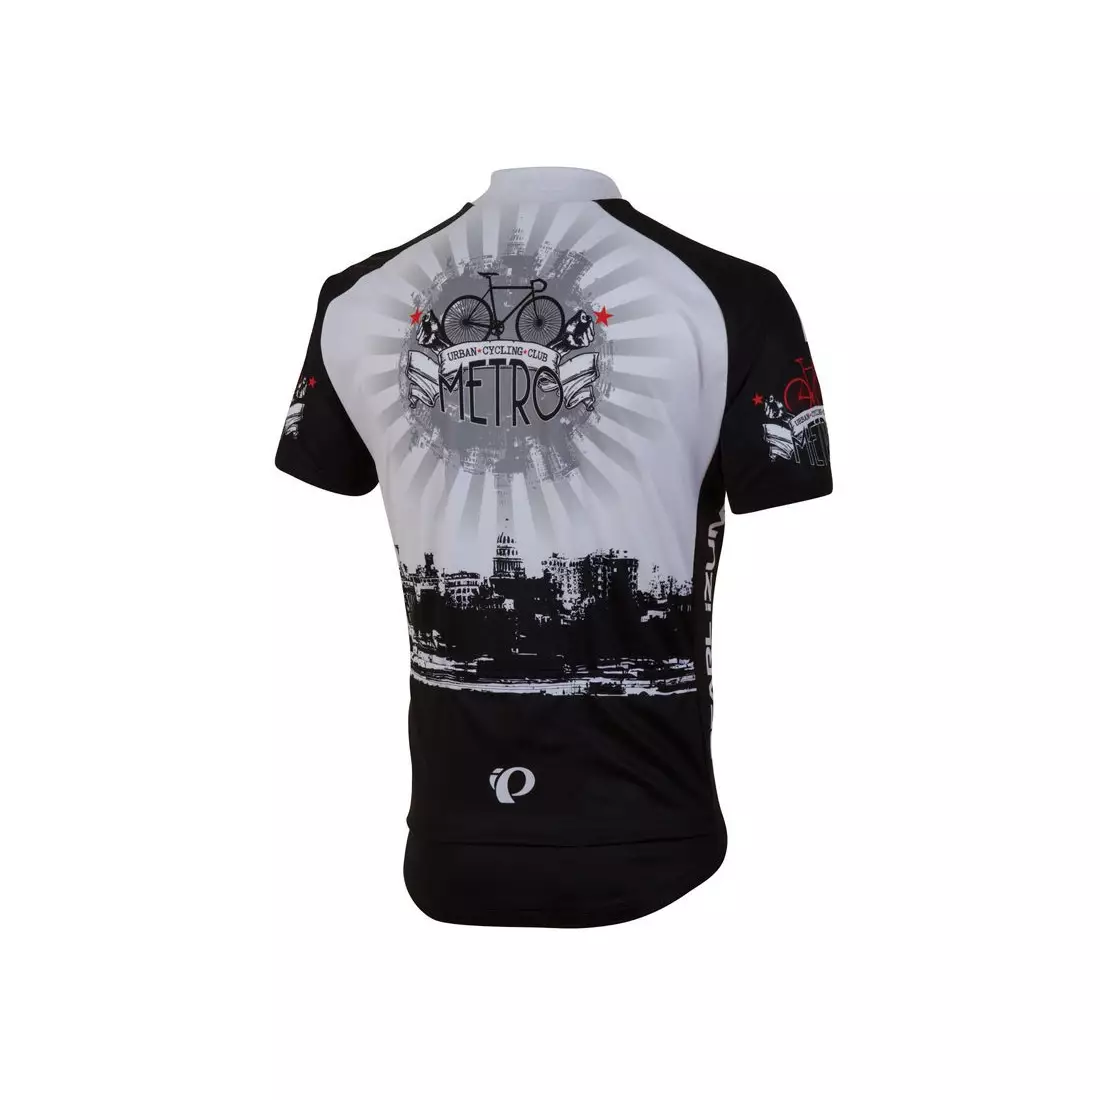 PEARL IZUMI - 0705-4IY SELECT LTD - men's cycling jersey, color: White and black